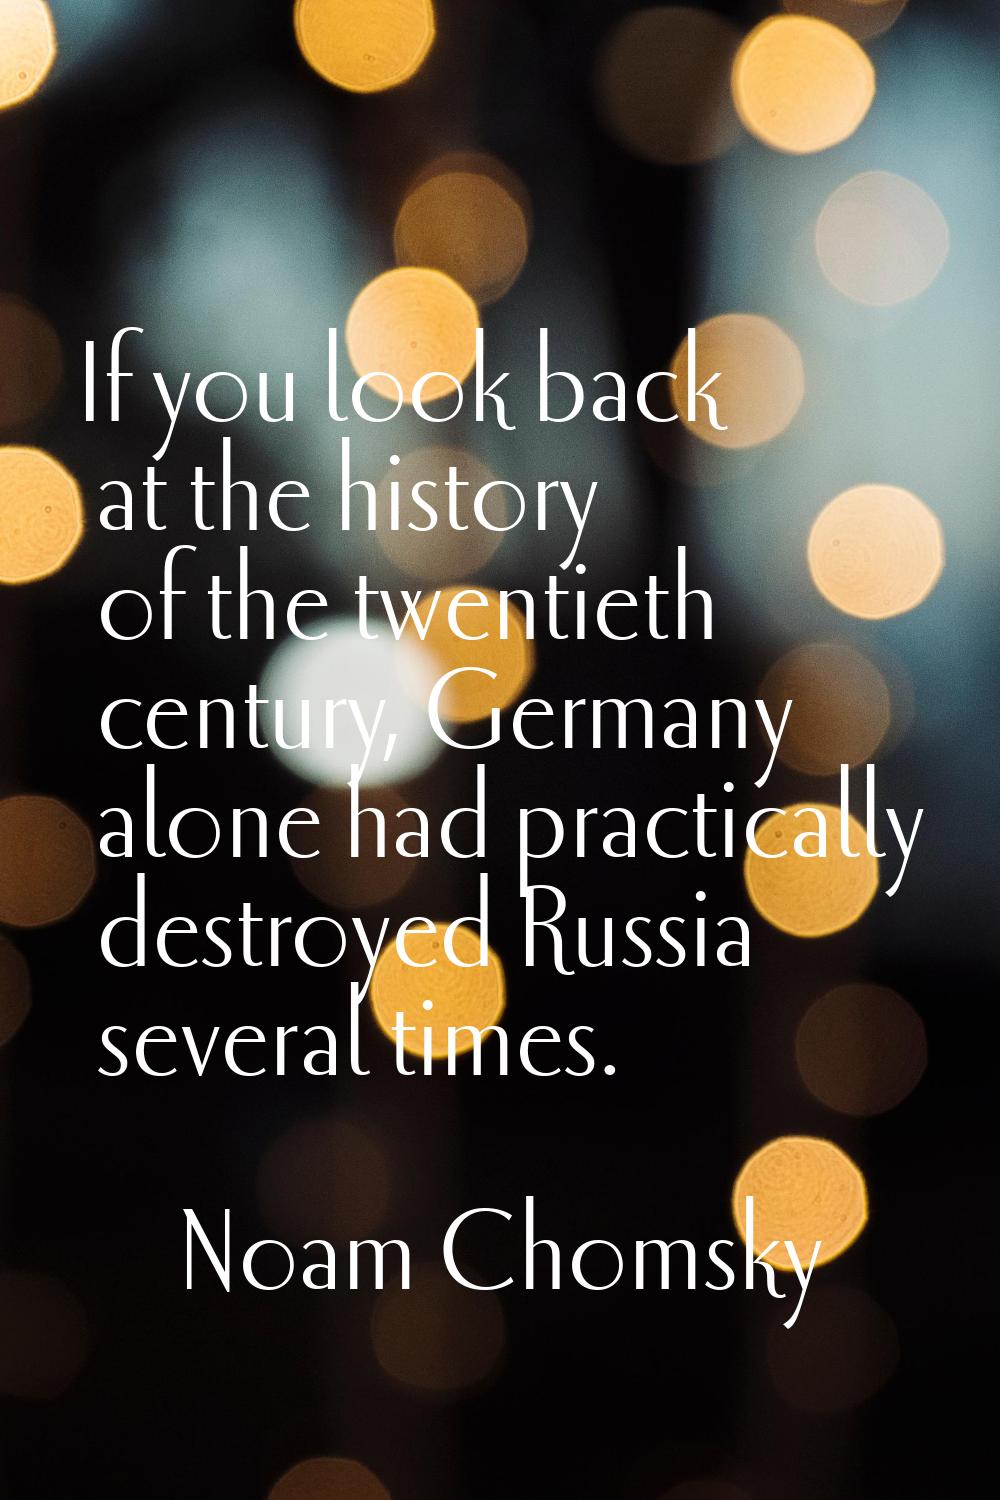 If you look back at the history of the twentieth century, Germany alone had practically destroyed R